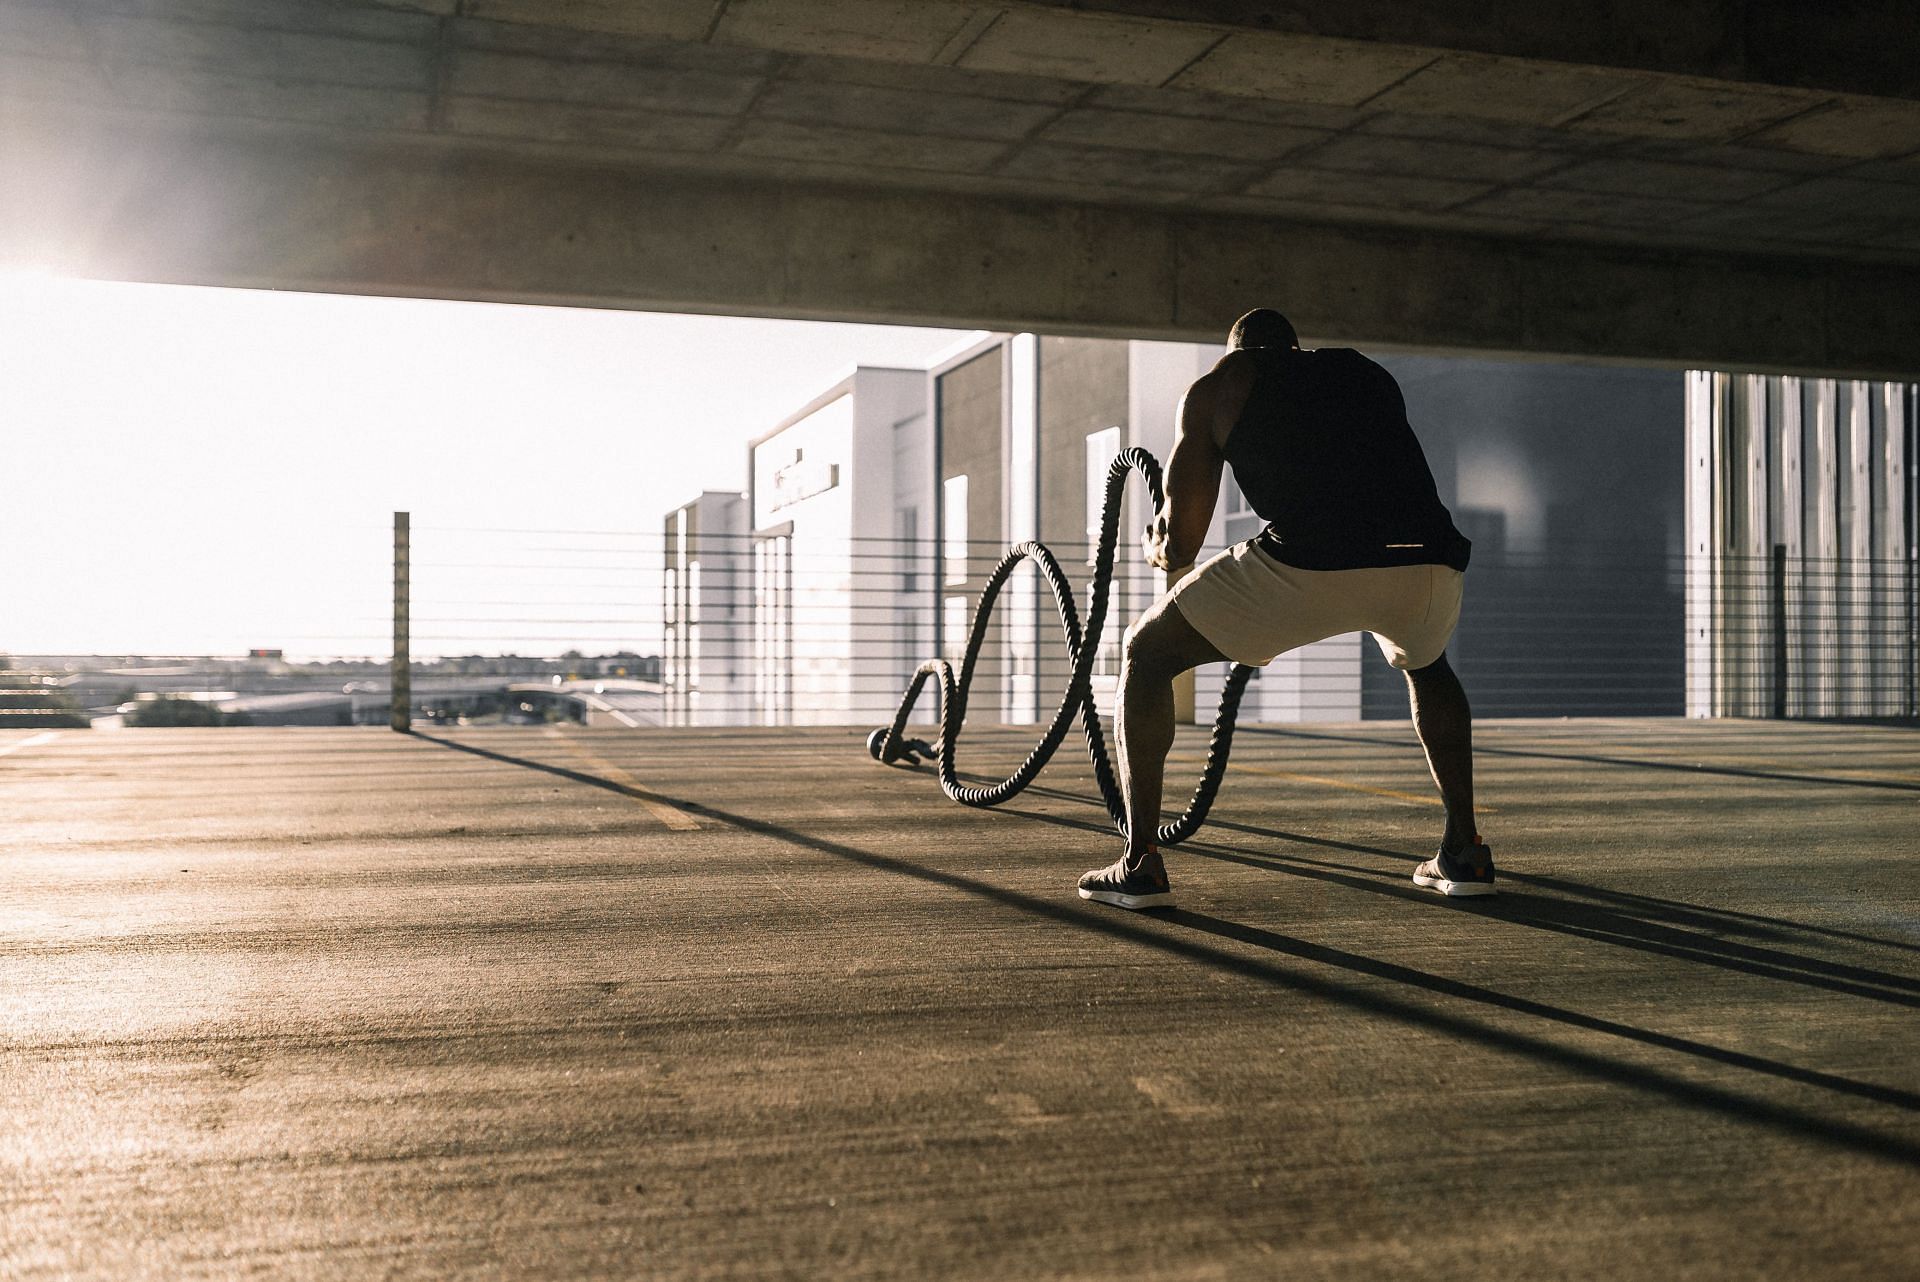 outdoor workout can provide a challenge(Photo by Karsten Winegeart on Unsplash)